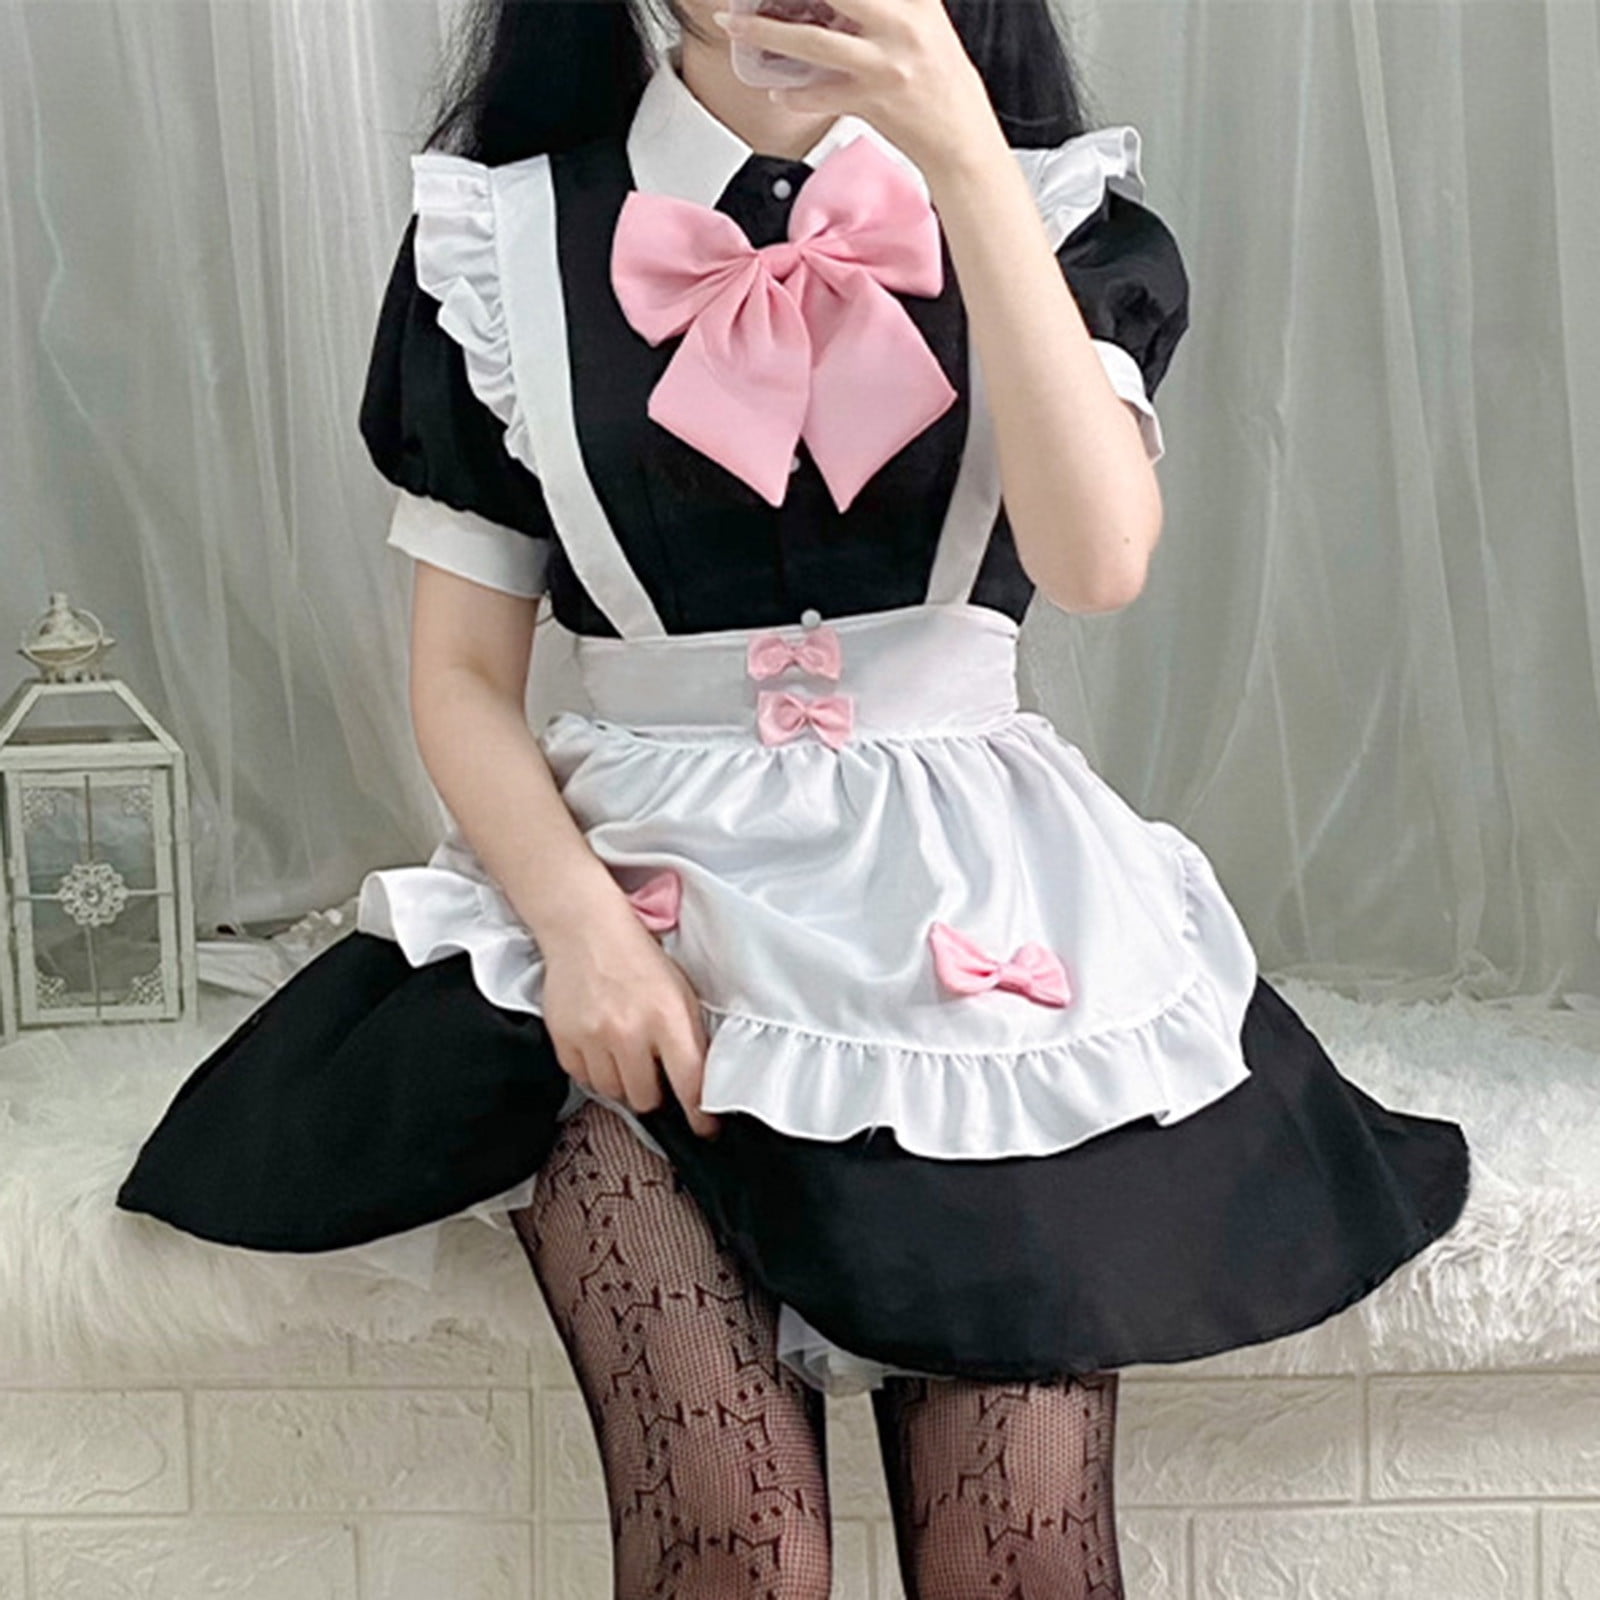 Shop For Anime Cosplay Costumes - Cossky